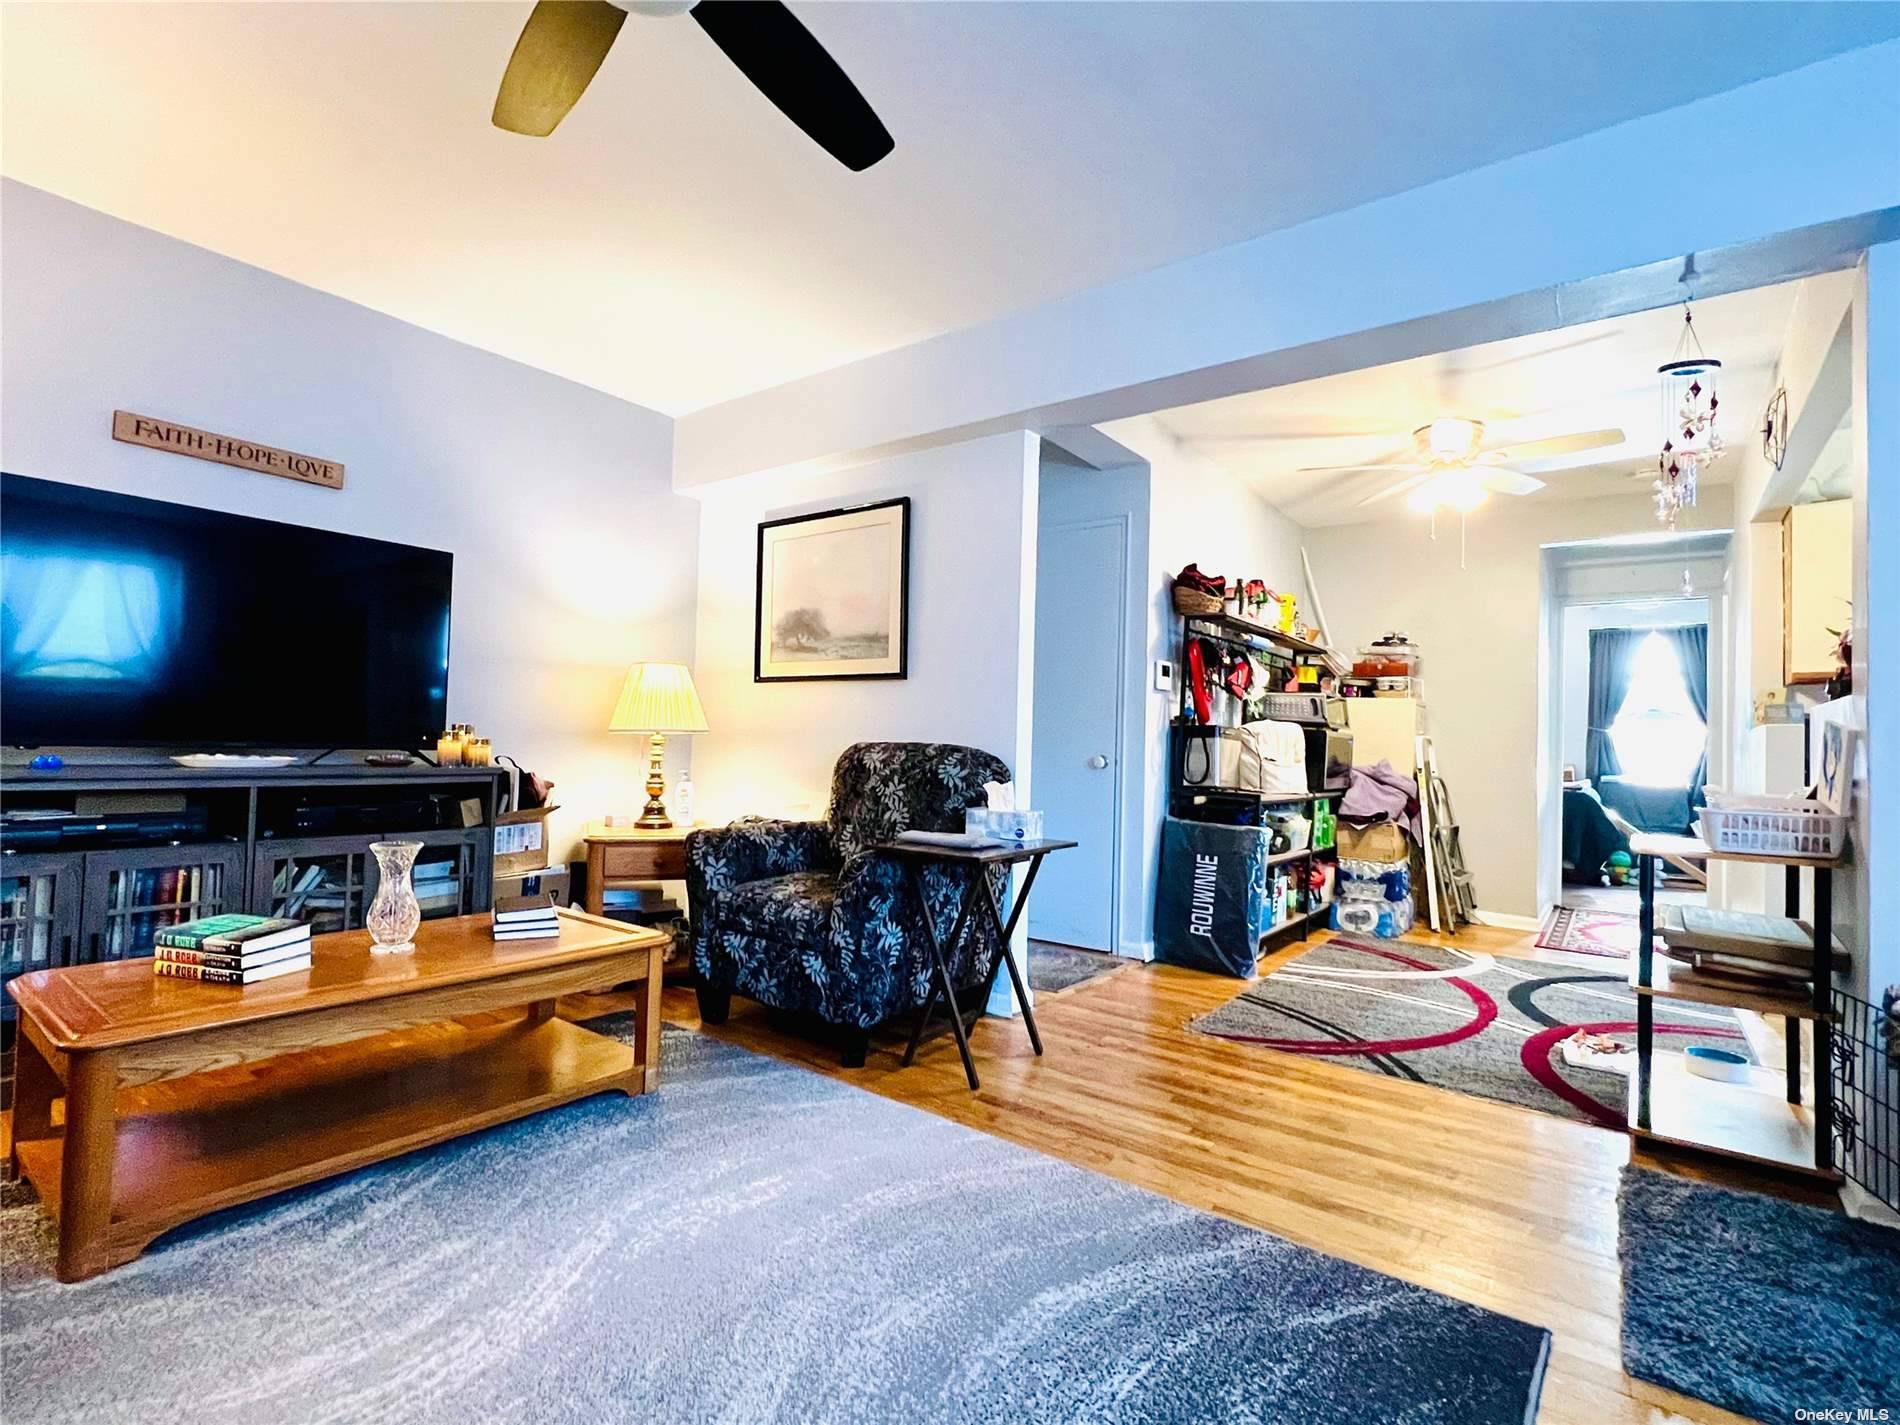 Sunny 1 bedroom coop in highly sought after Windsor Park in the Oakland Gardens section of Bayside, Queens.